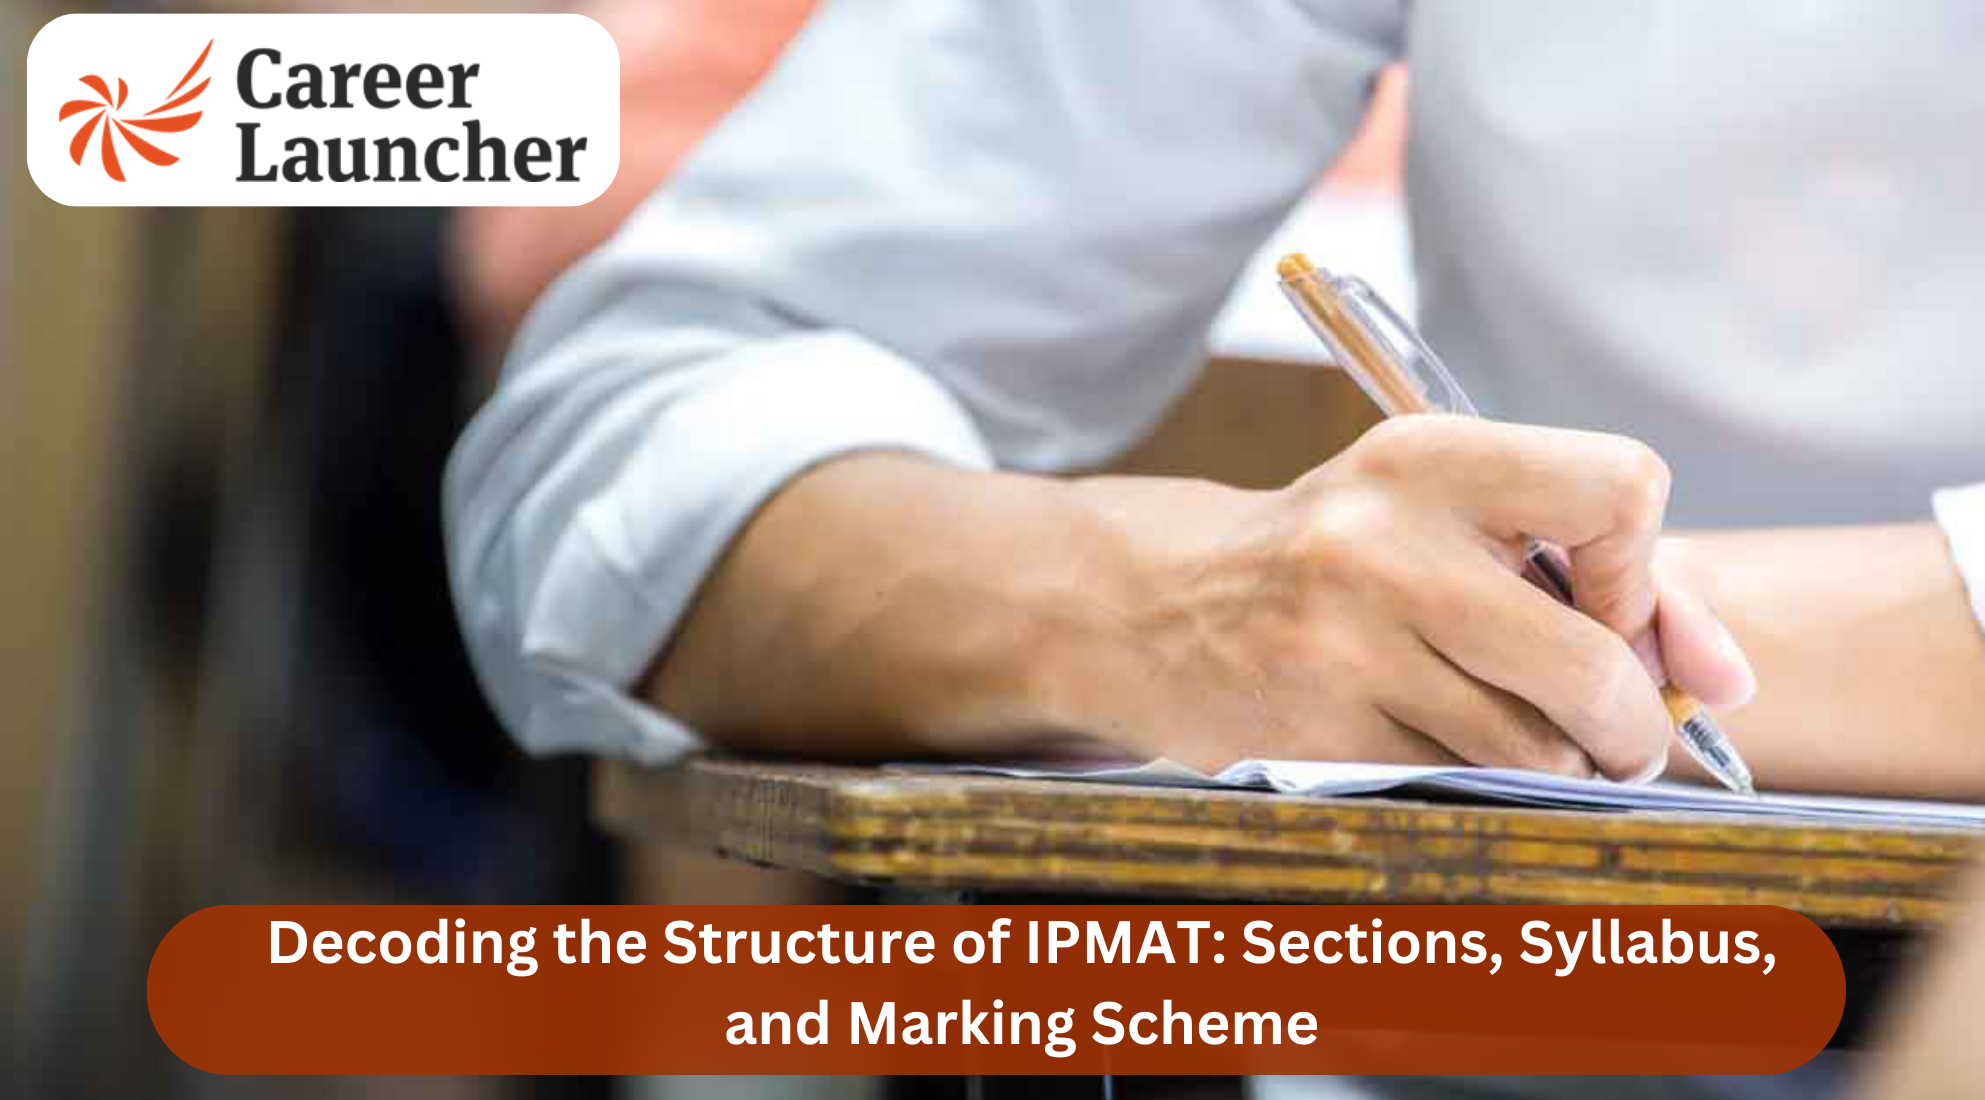 Decoding the Structure of IPMAT